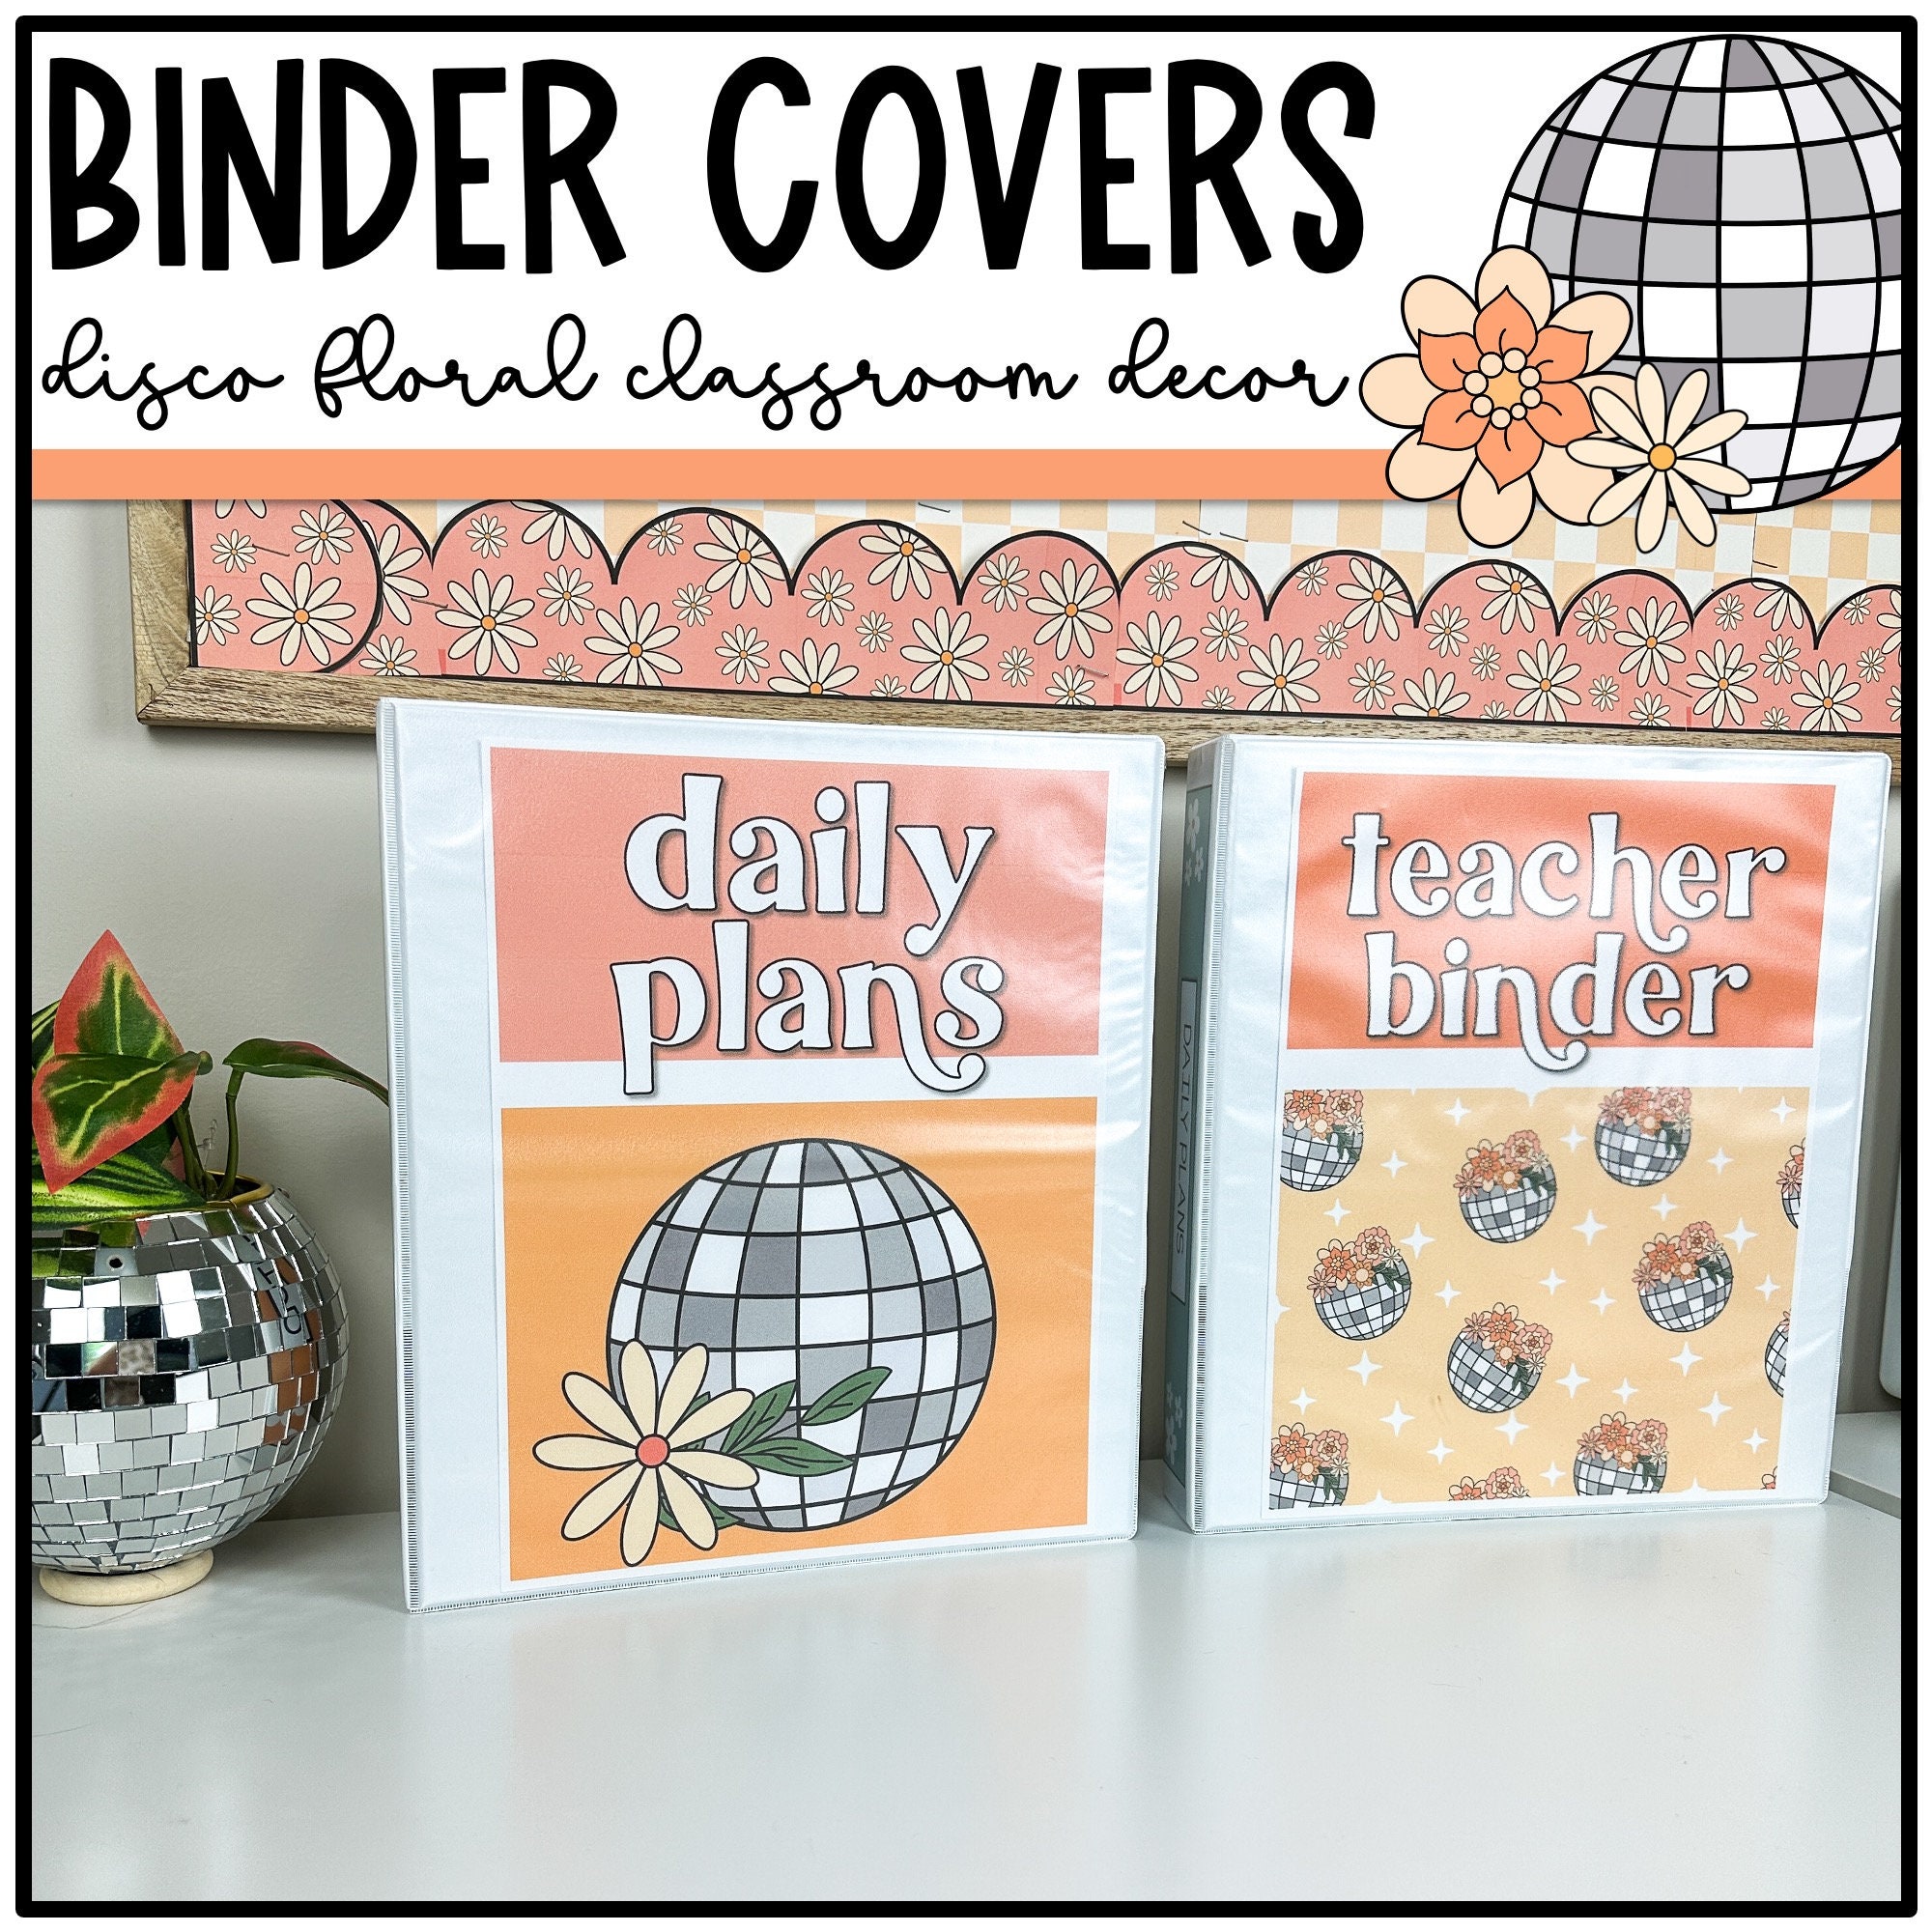 Binder Covers and Spines, Groovy Classroom Decor and Organizatio